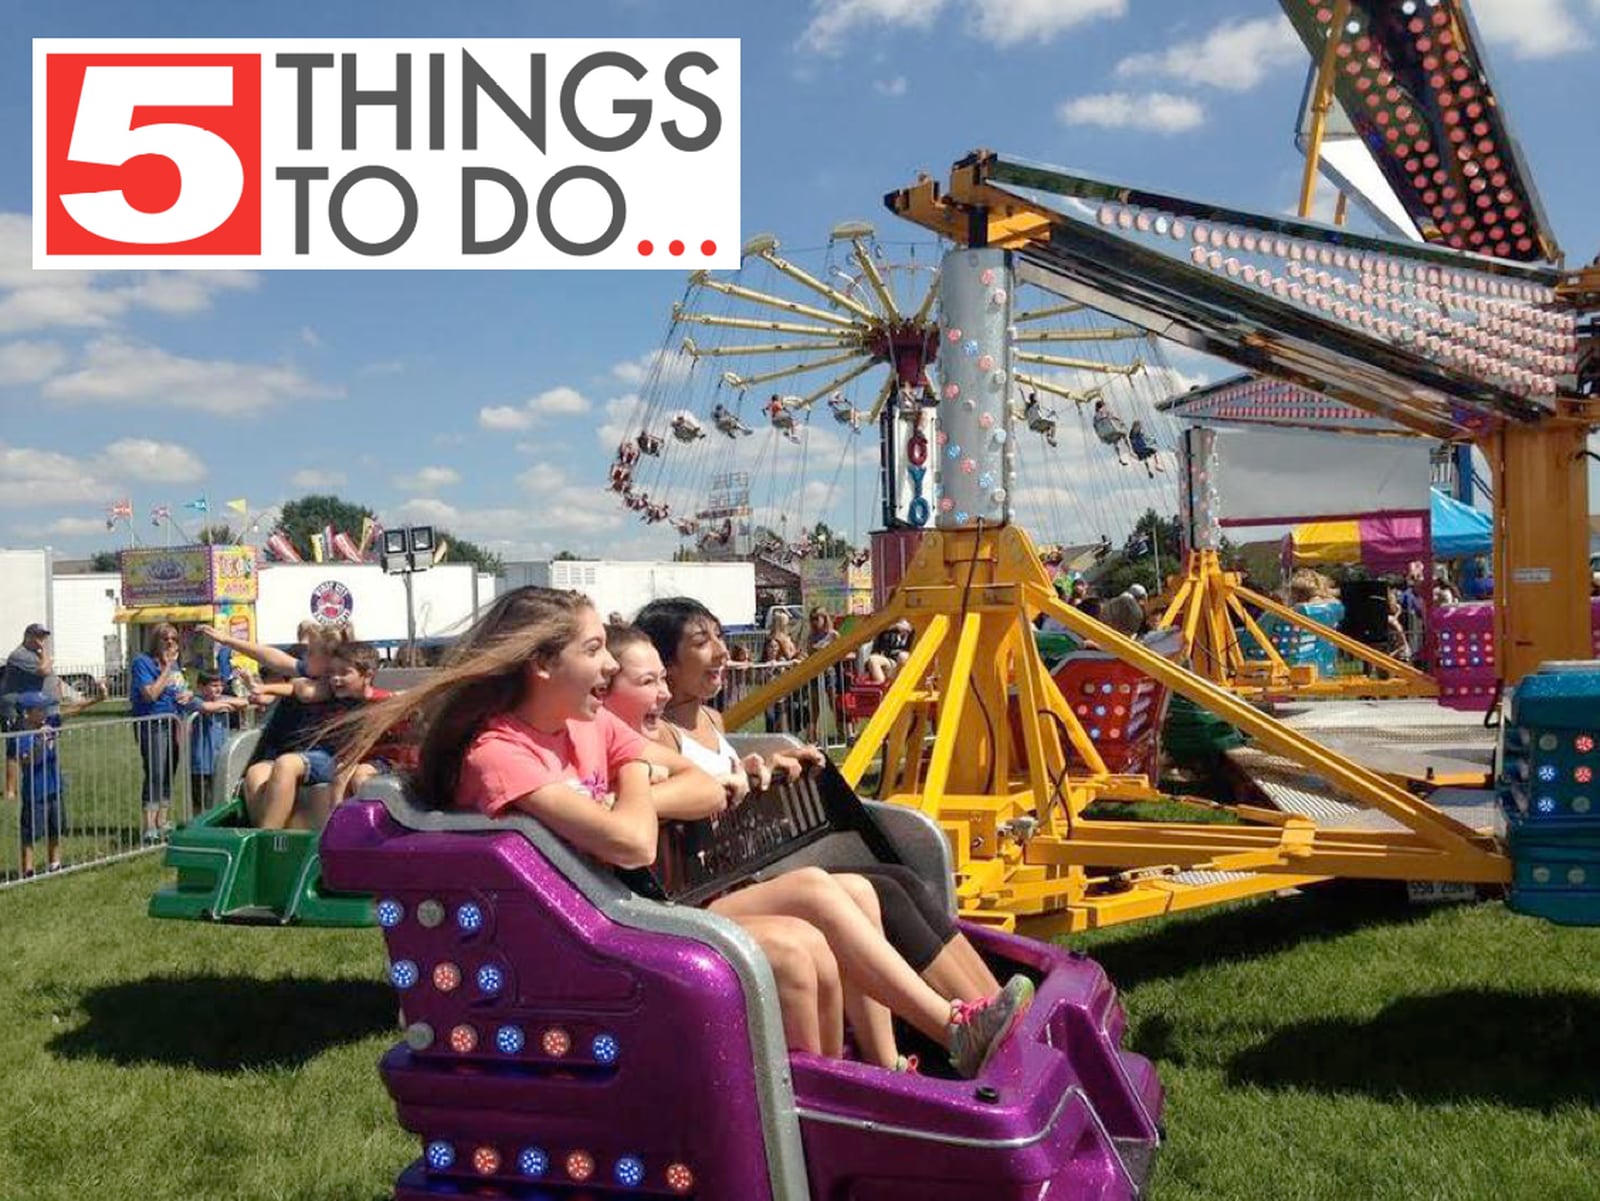 5 cool things to do in McHenry County Shaw Local